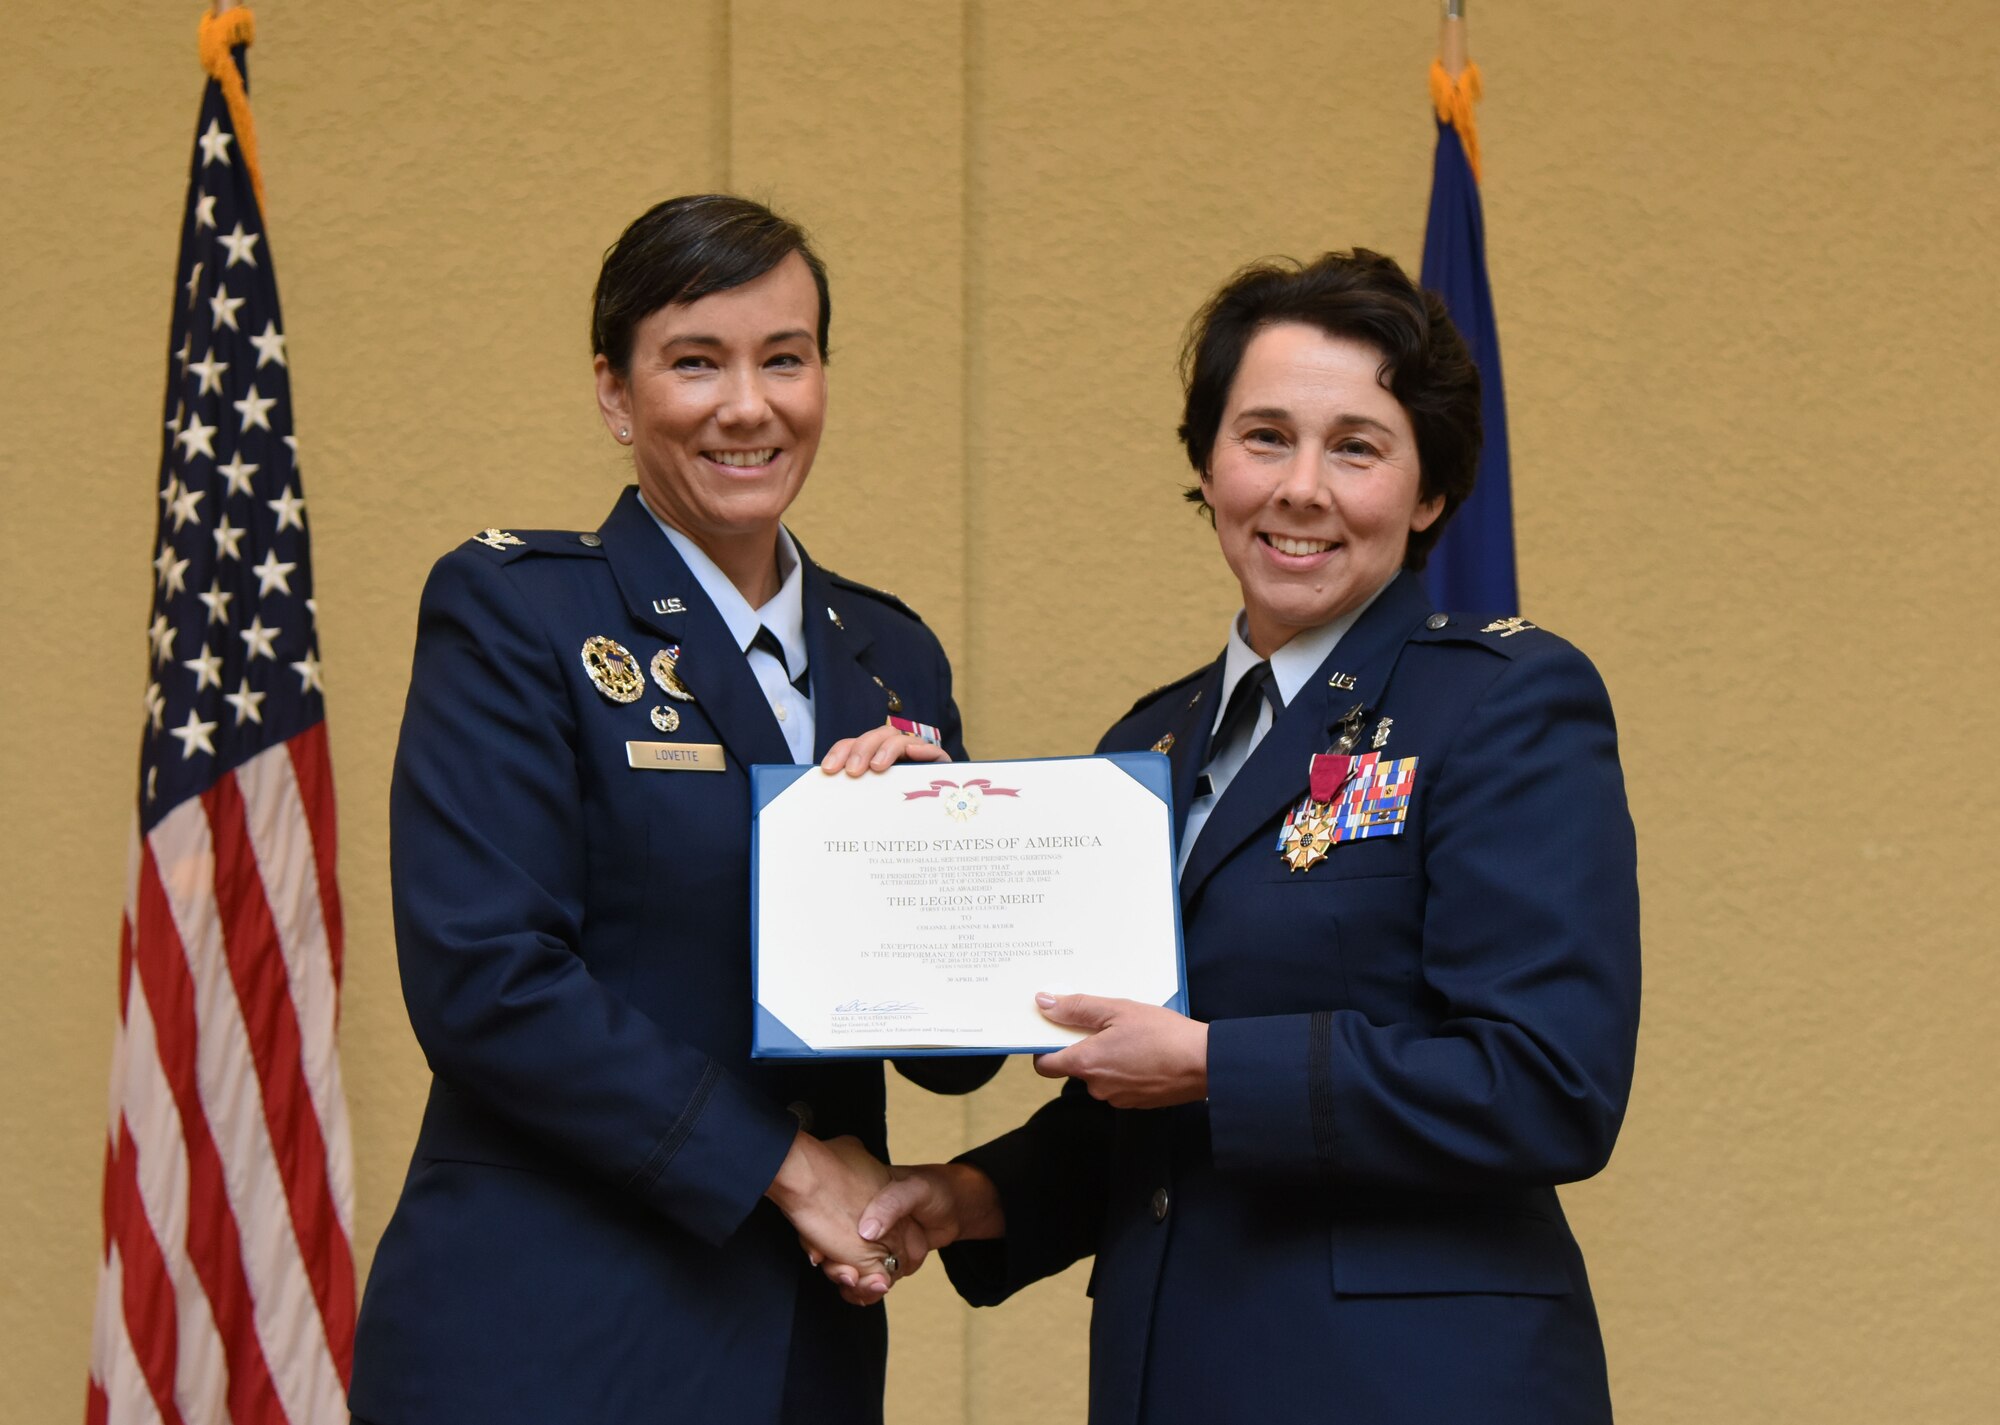 U.S. Air Force Col. Debra Lovette, 81st Training Wing commander, presents Col. Jeannine Ryder, outgoing 81st Medical Group commander, with a Legion of Merit first oak leaf cluster certificate during the 81st MDG change of command ceremony in the Bay Breeze Event Center at Keesler Air Force Base, Mississippi, June 22, 2018. Ryder relinquished command of the 81st MDG and will be heading to the Air Force Material Command, Wright-Patterson Air Force Base, Ohio, where she will be the surgeon general. (U.S. Air Force photo by Kemberly Groue)